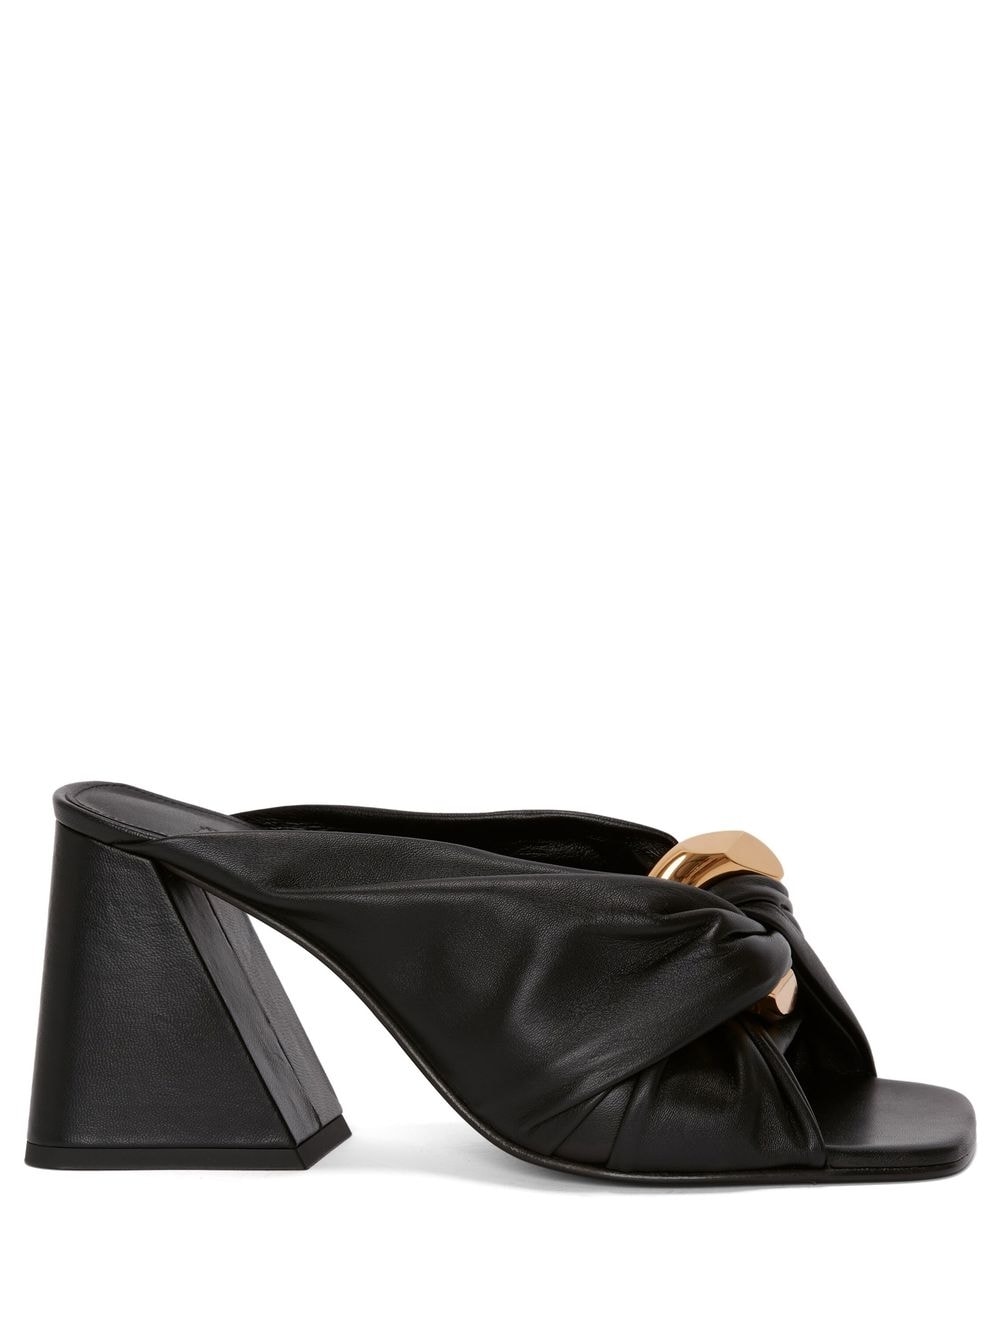 JW Anderson twisted chain leather mules - Black